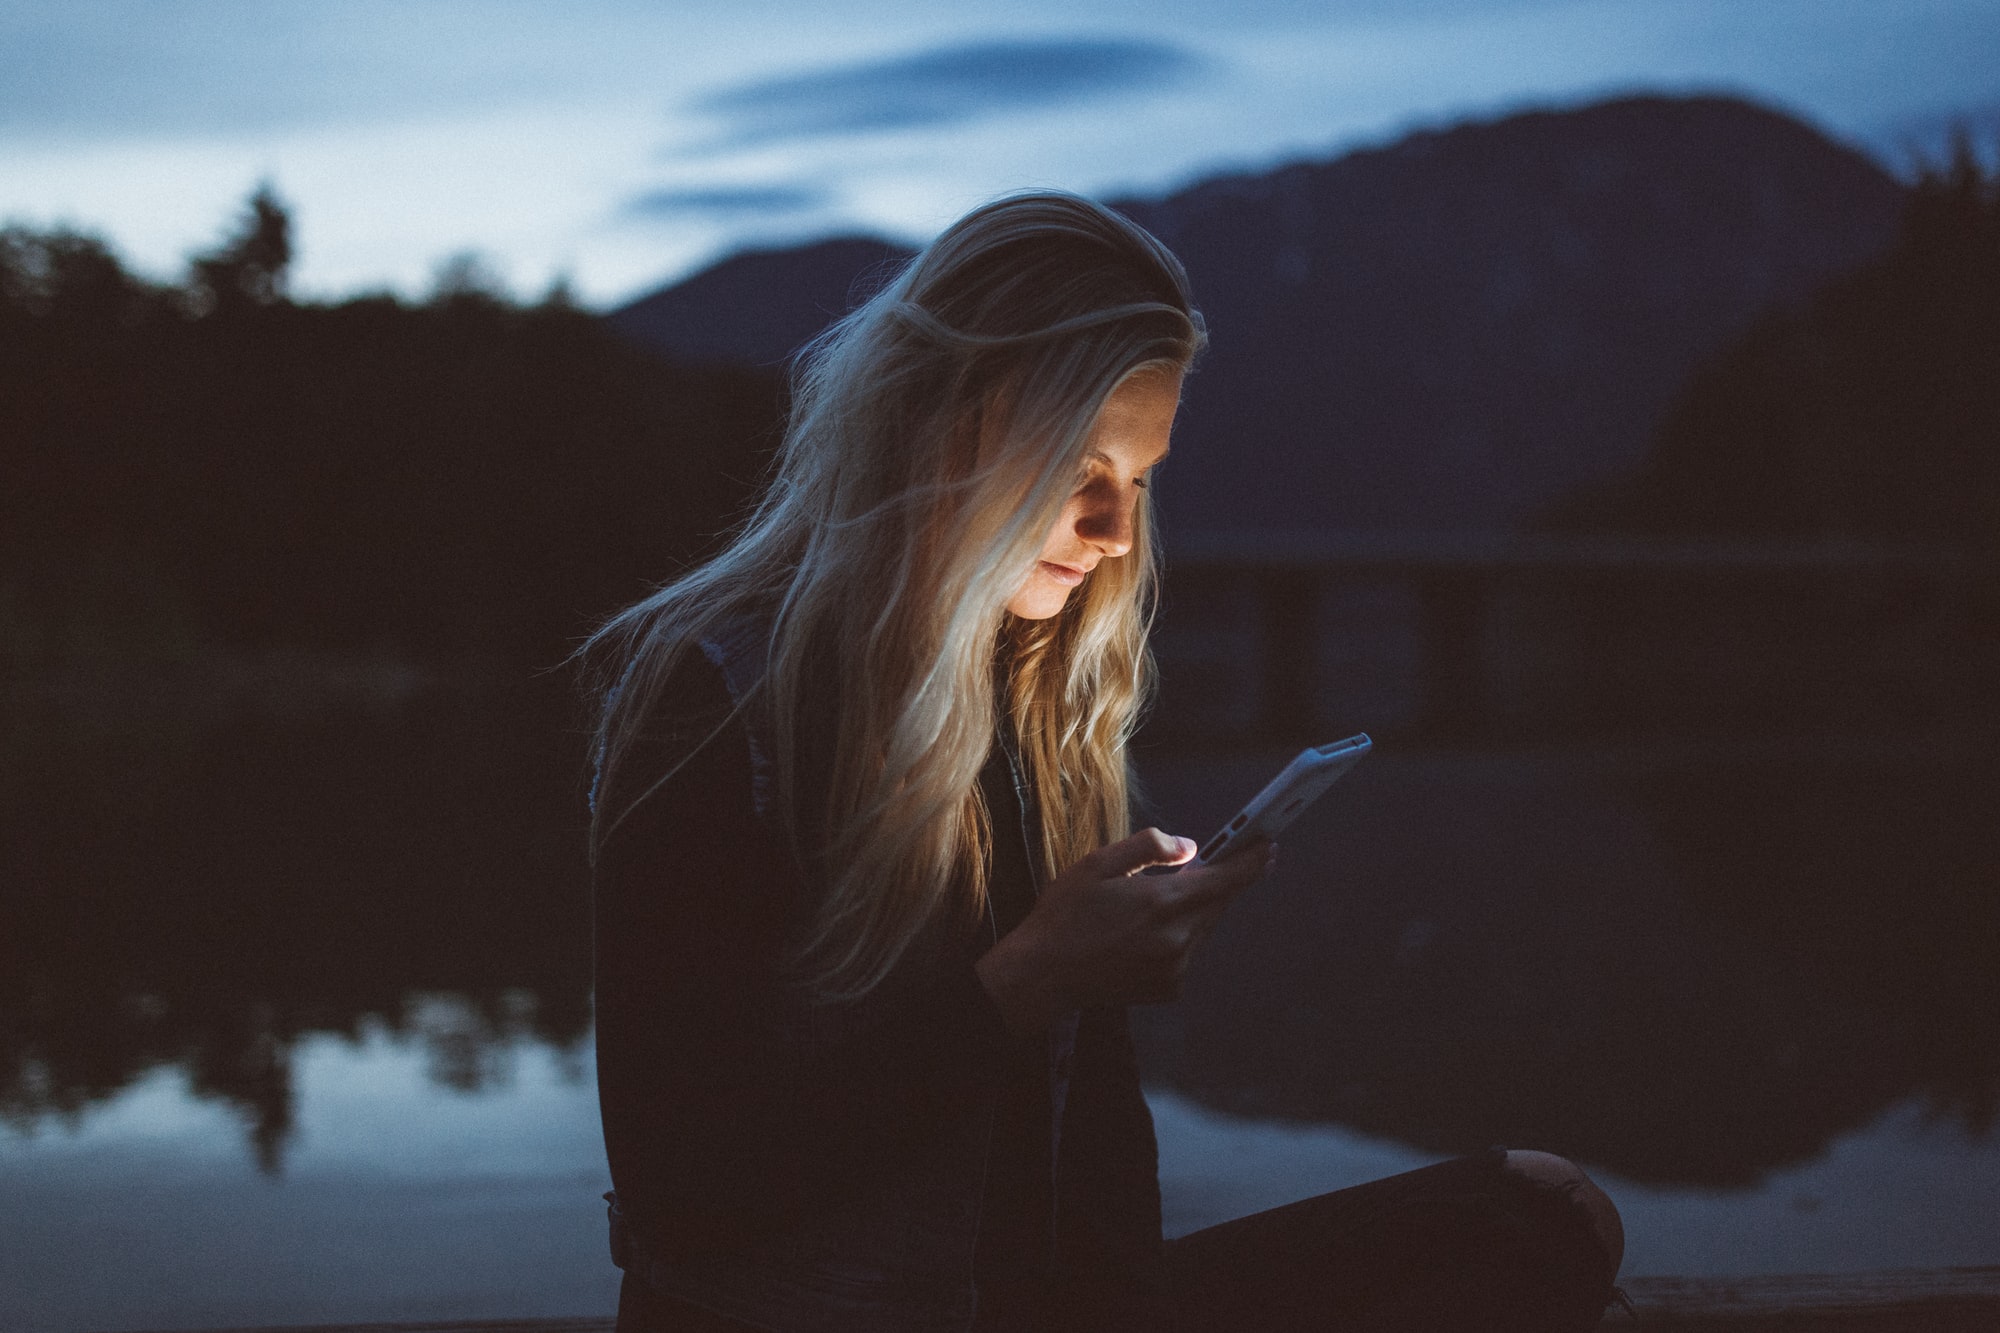 Woman with lit face from mobile phone. Credits: Becca Tarpet @ Unsplash